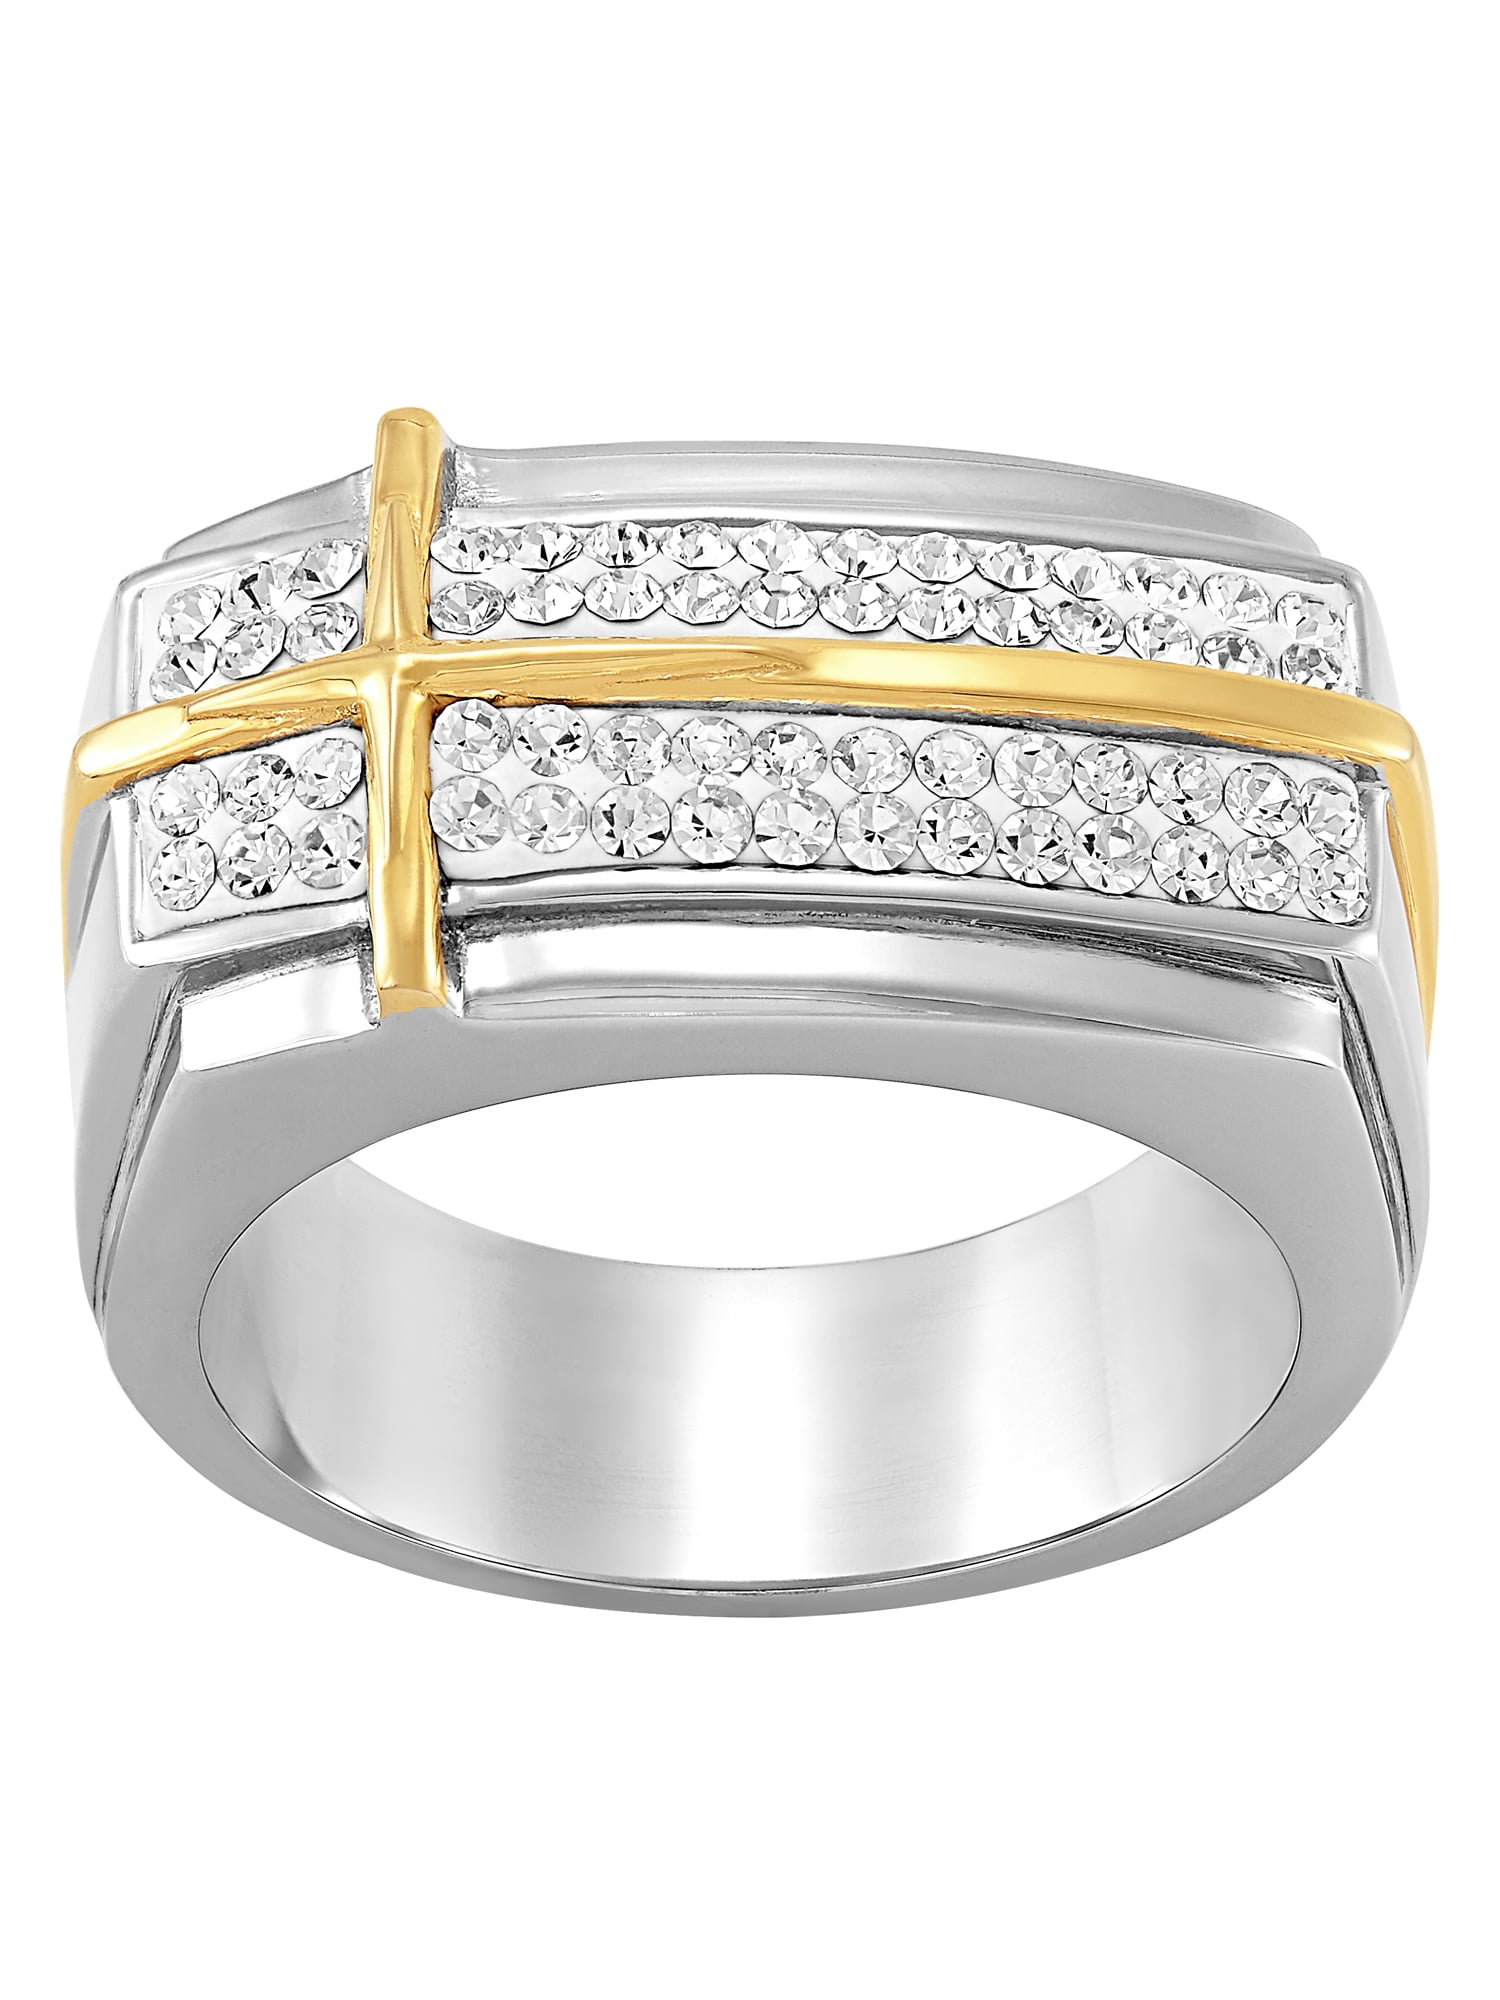 Brilliance Fine Jewelry Crystal Overlay Cross Ring in Stainless Steel, Size 11